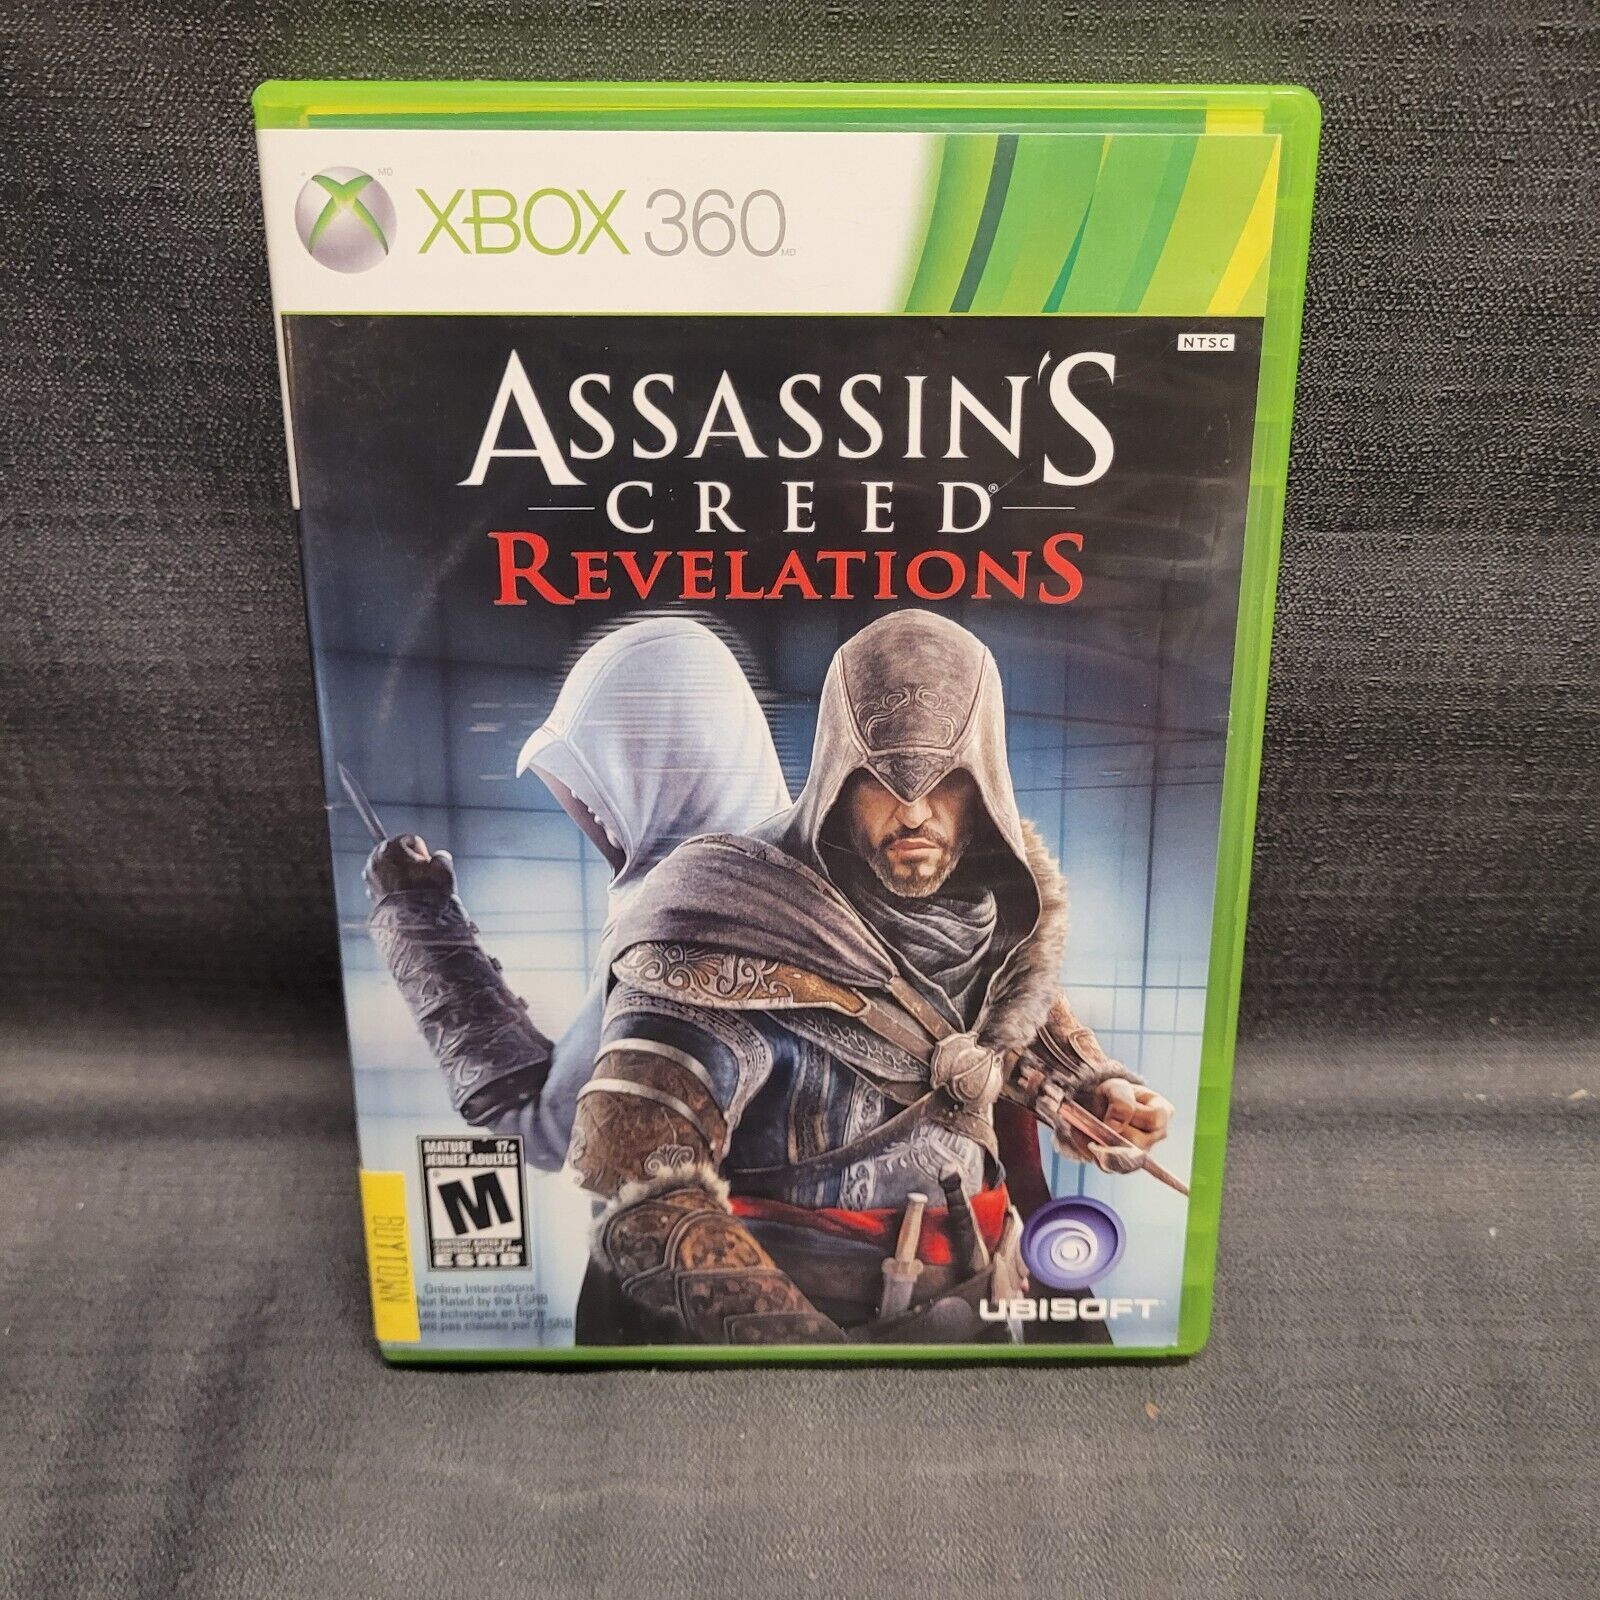 Primary image for Assassin's Creed: Revelations (Microsoft Xbox 360, 2011) Video Game